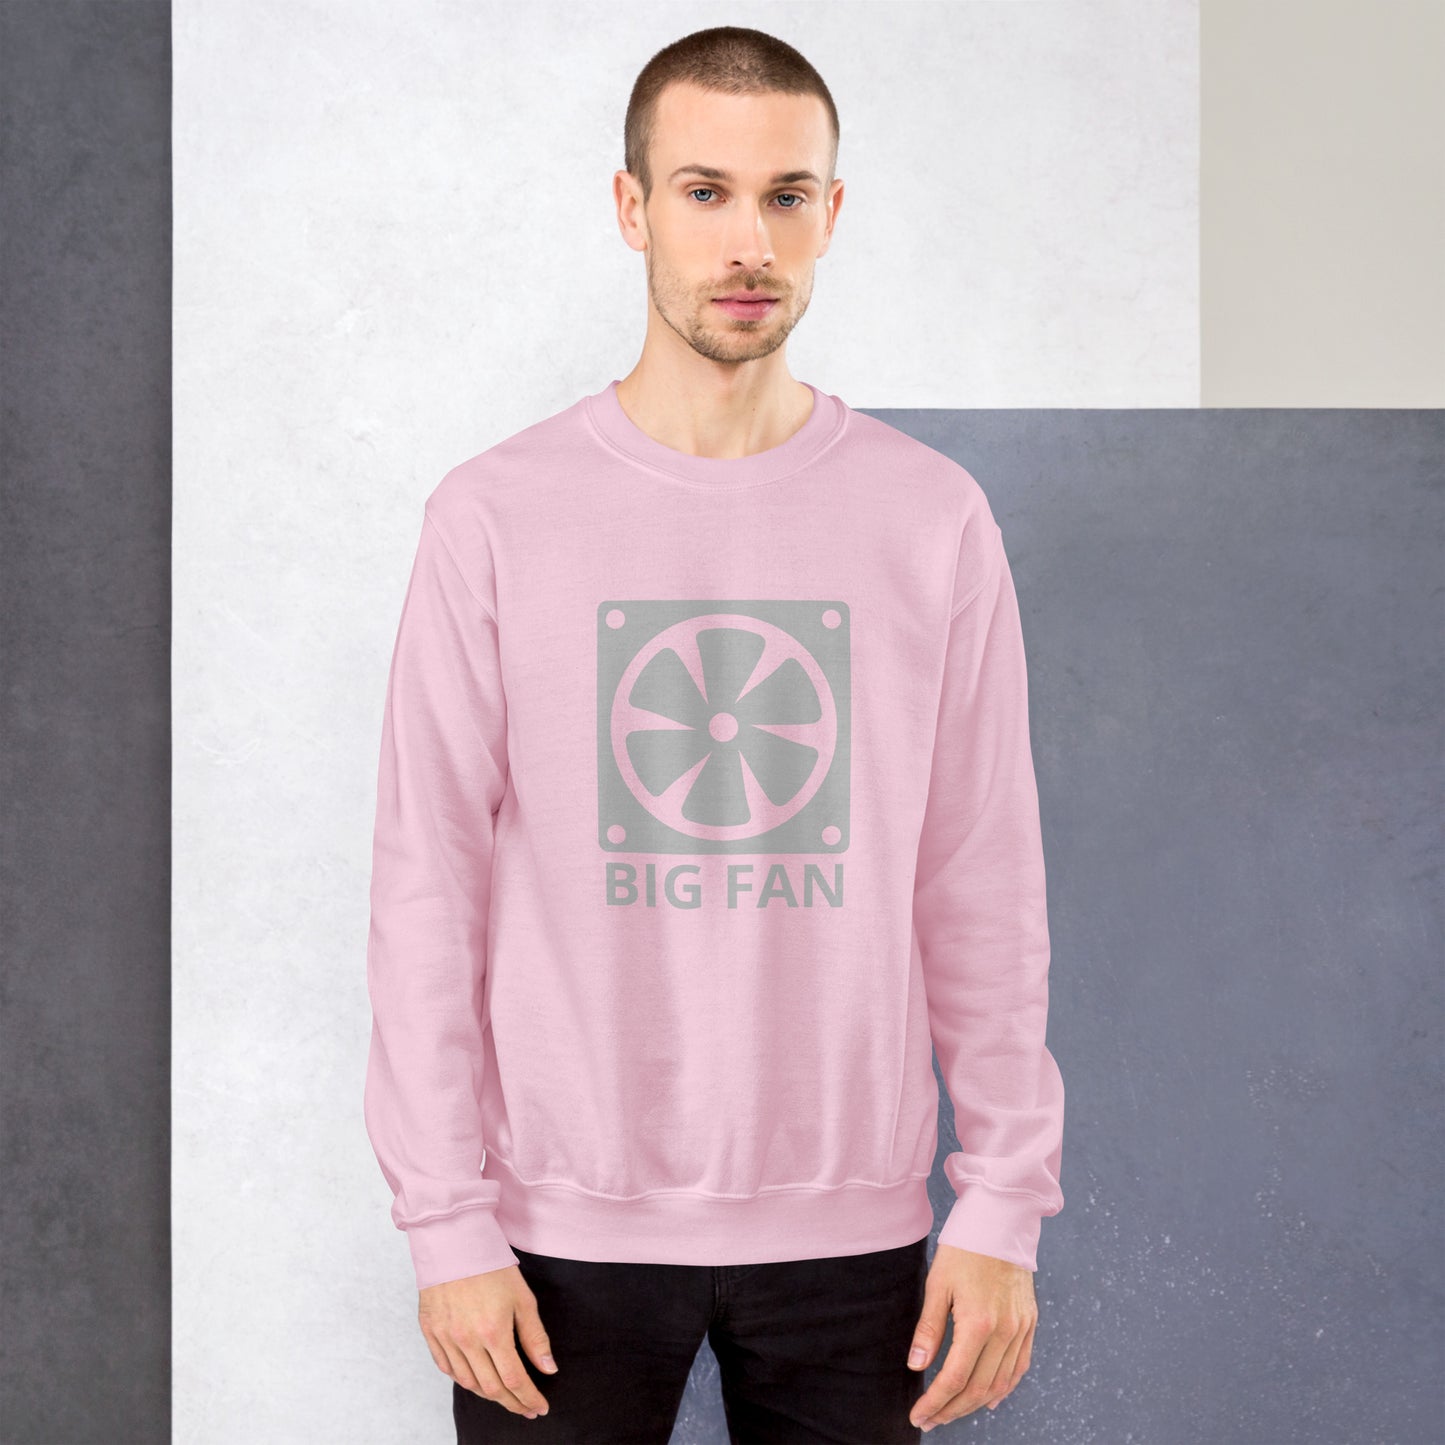 Men with pink sweatshirt with image of a big computer fan and the text "BIG FAN"